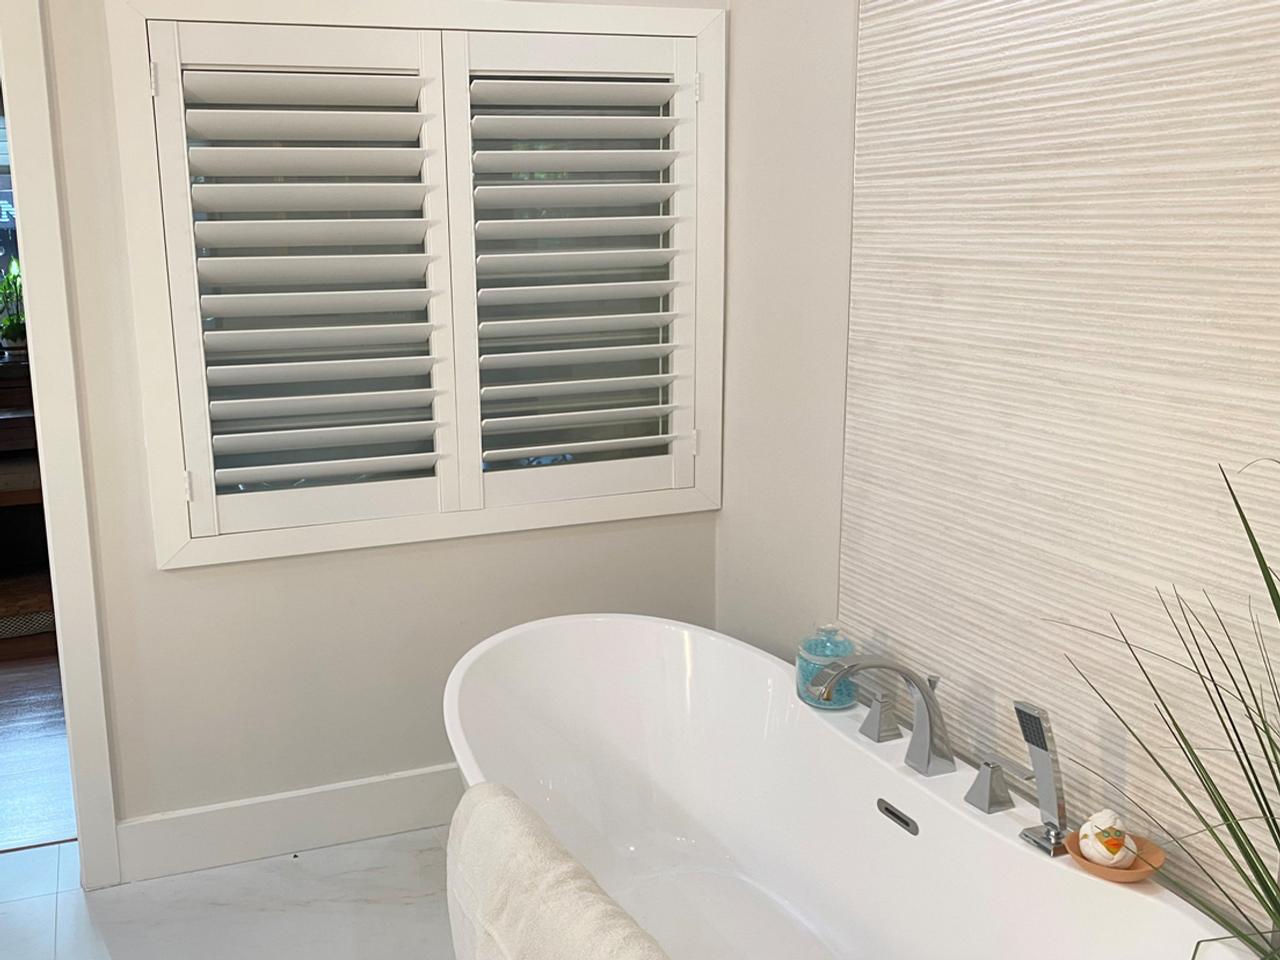 Bathroom with shutters